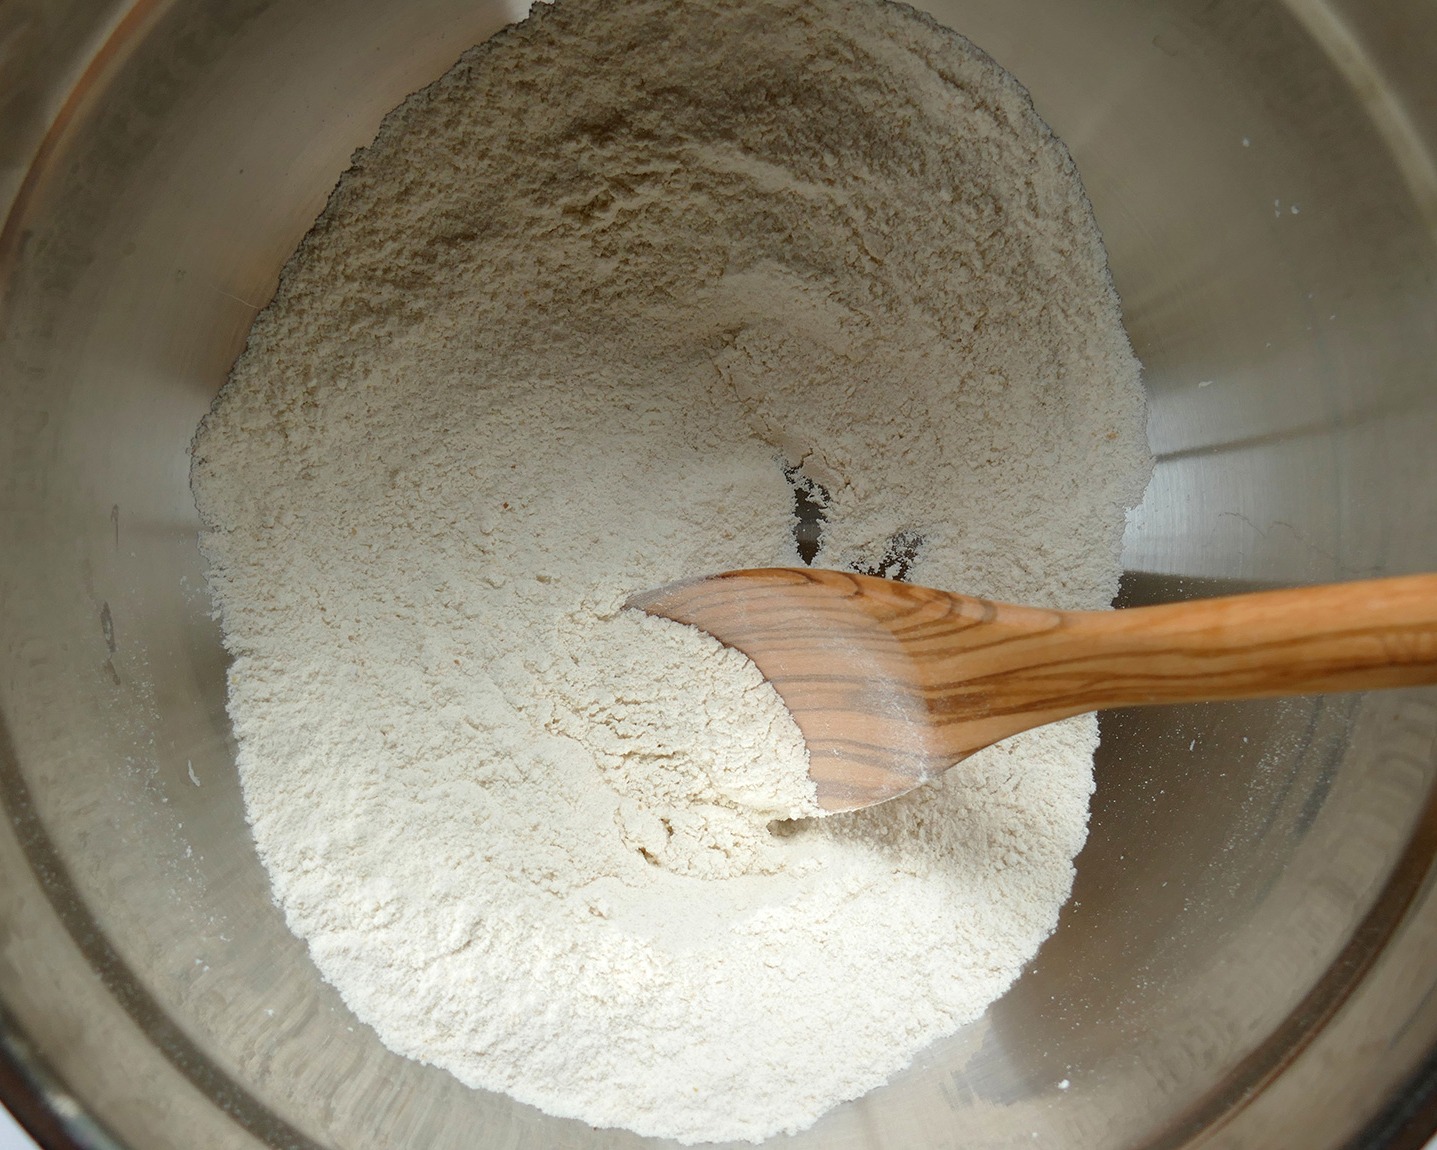 Dry ingredients mixed together in a metal bowl with a wooden spoon inserted in the mixture